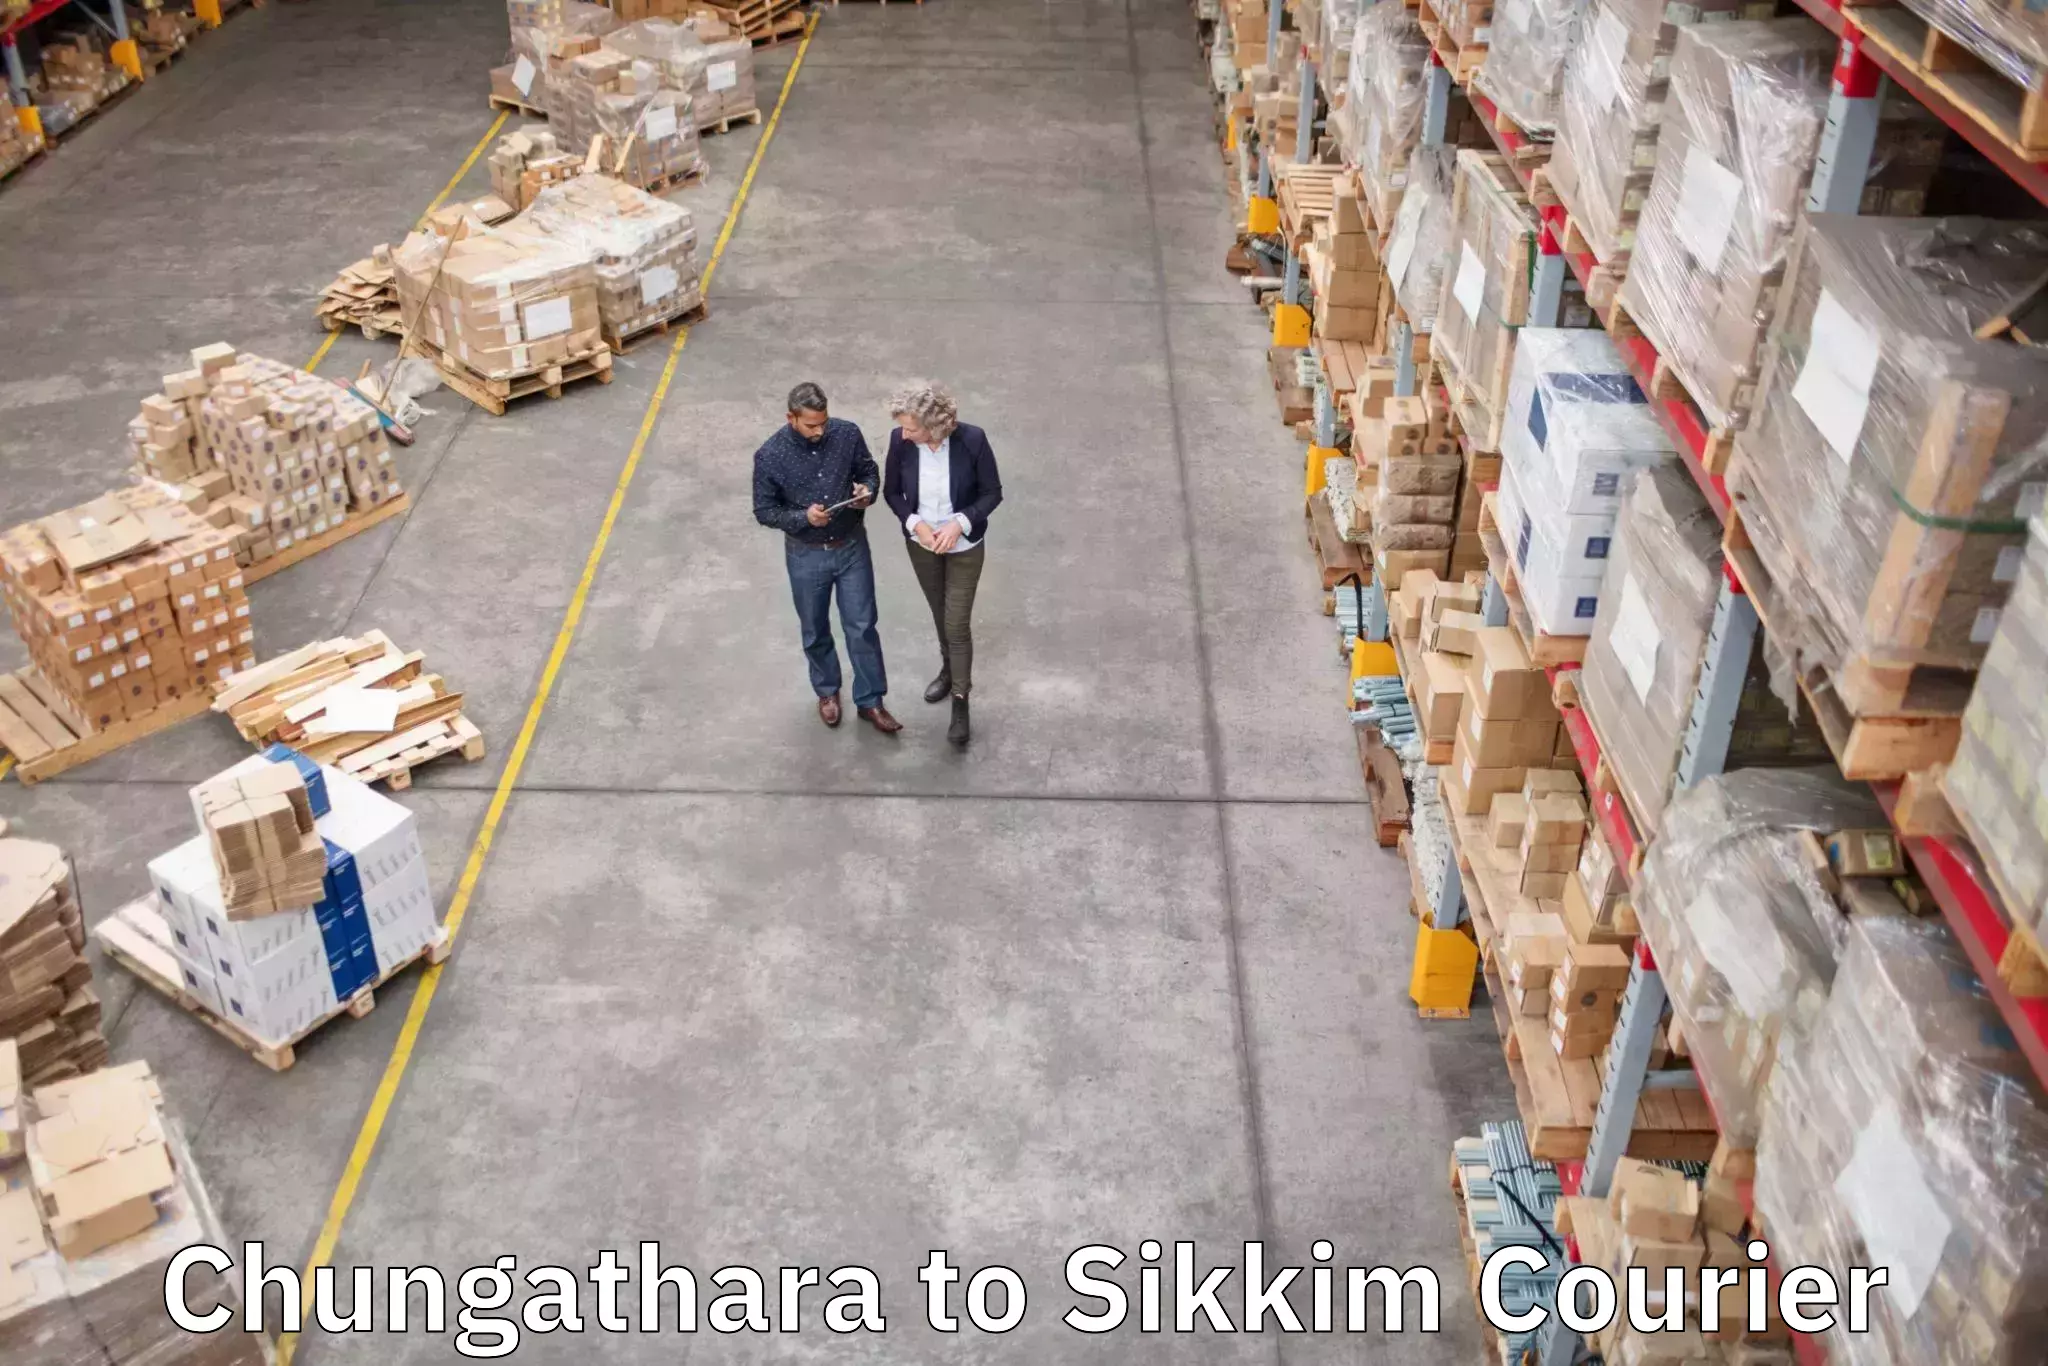 Hassle-free luggage shipping in Chungathara to Sikkim